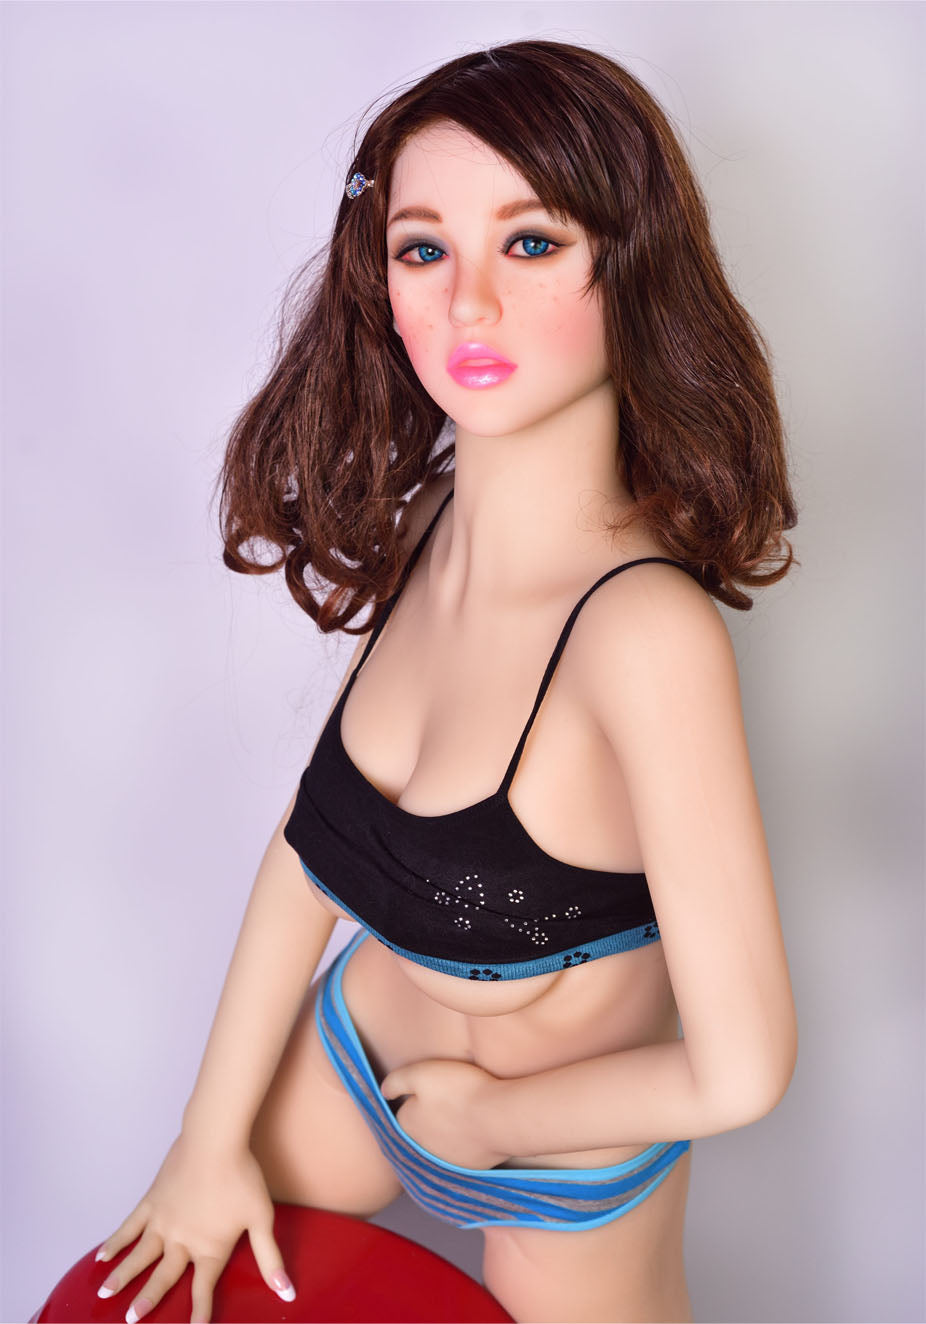 Doll Forever 155cm Nicole - Sex Dolls on Sexy Peacock